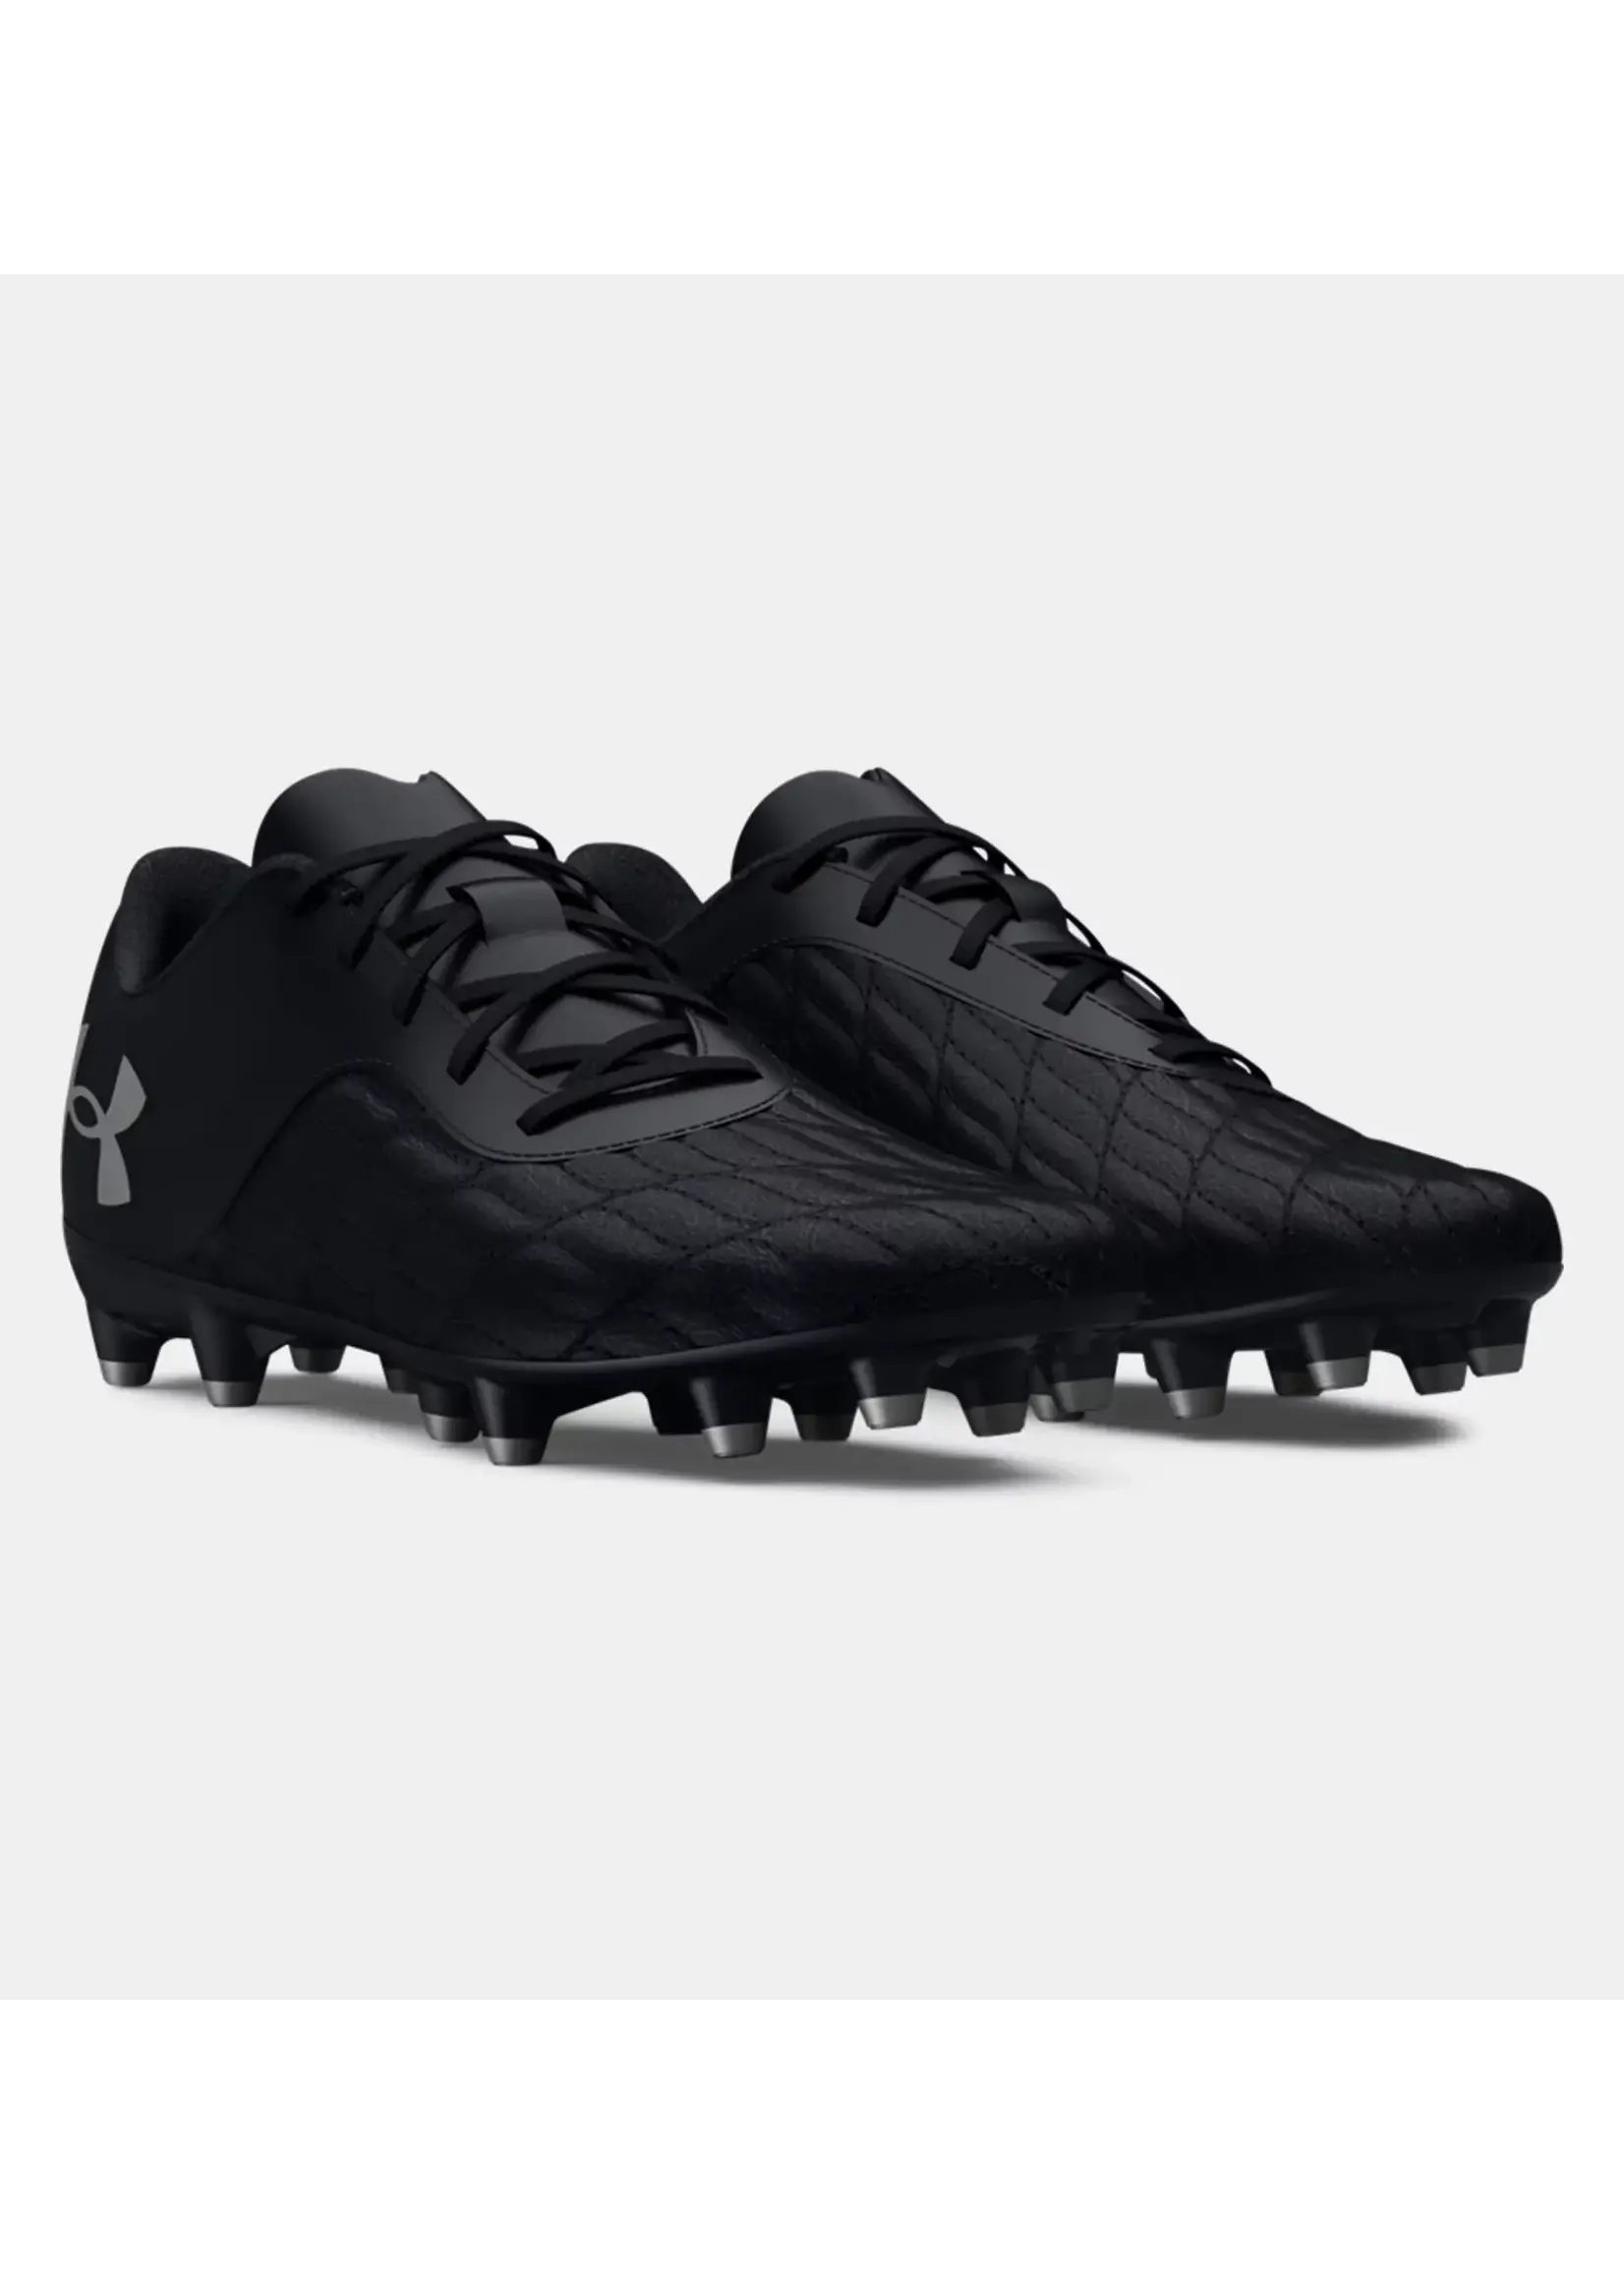 Under Armour UNDER ARMOUR SOULIERS MAGNETICO SELECT 3 FG